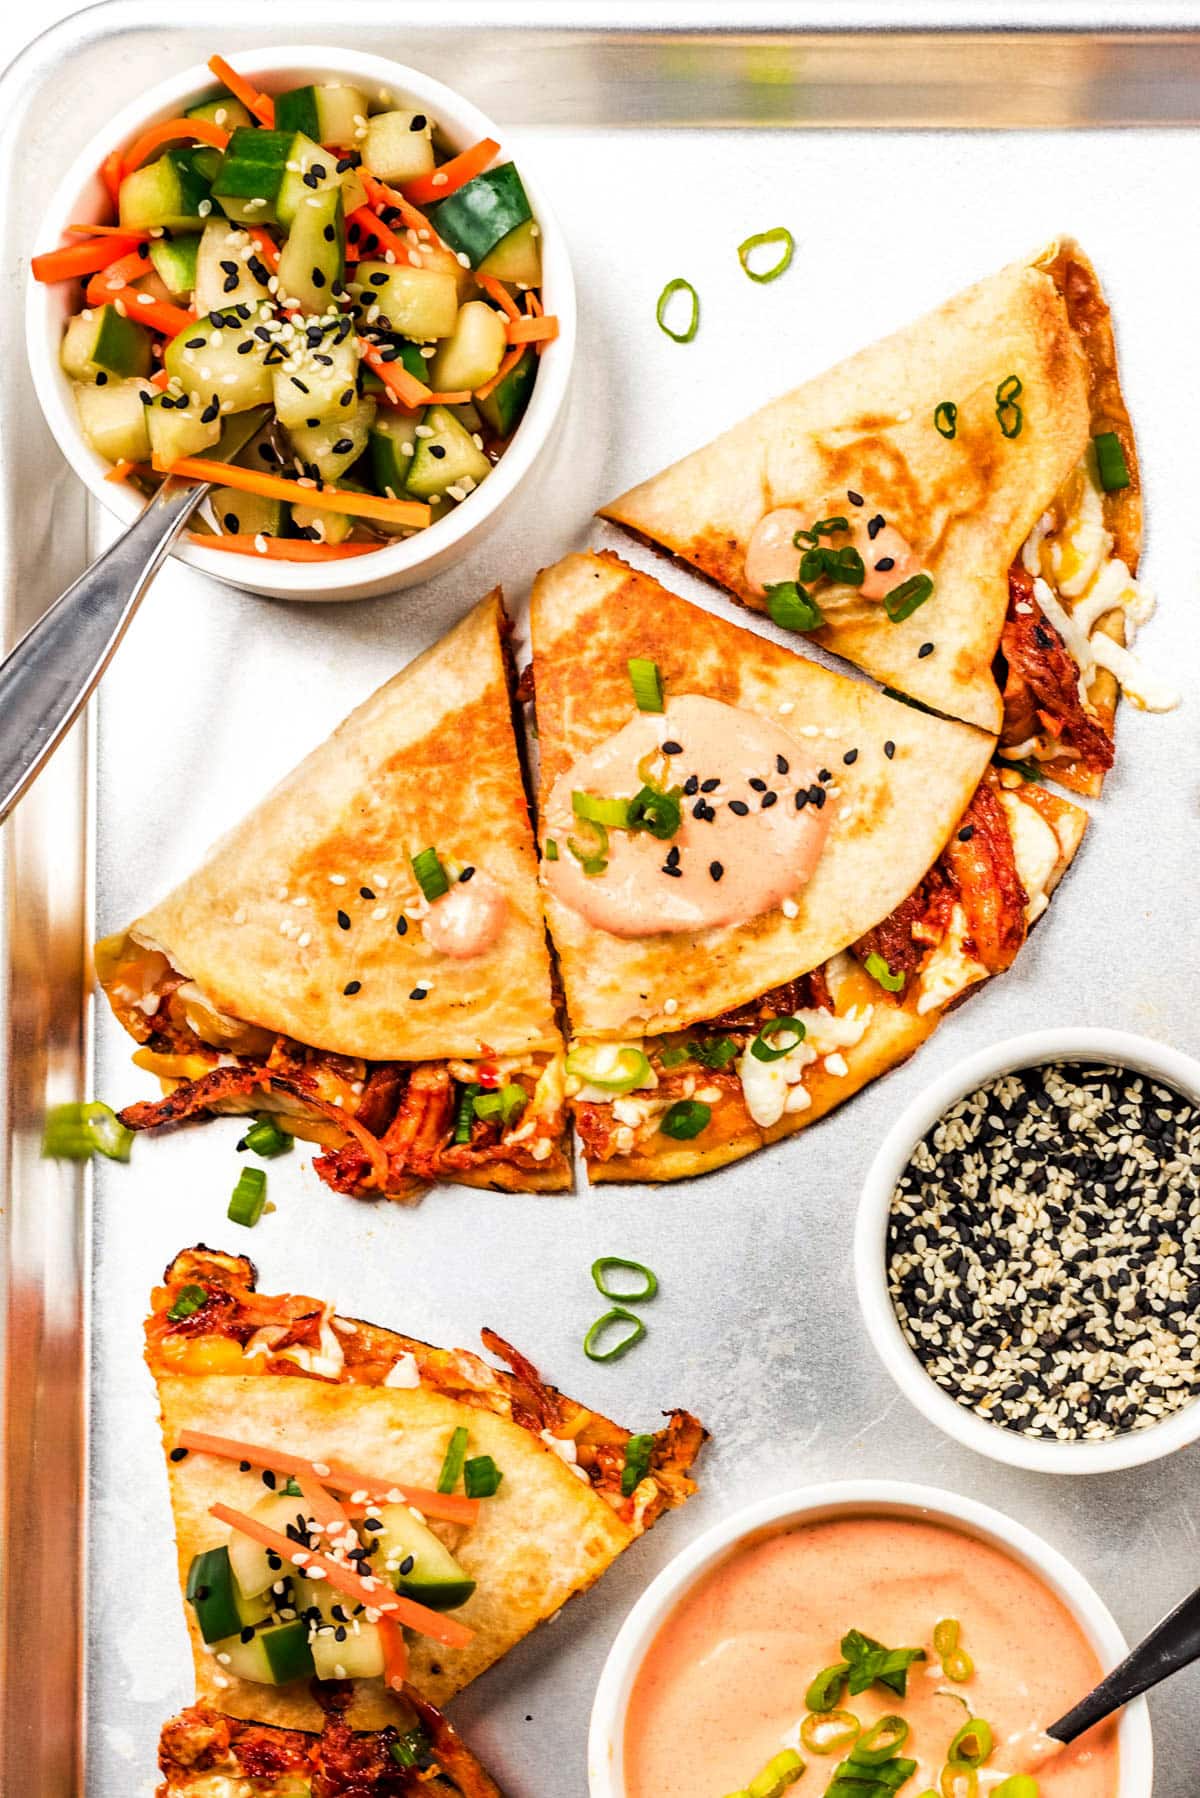 A quesadilla loaded with gochujang glazed shredded chicken, melted cheese, and green onion, cut into thirds and served with crema and pickled vegetables.